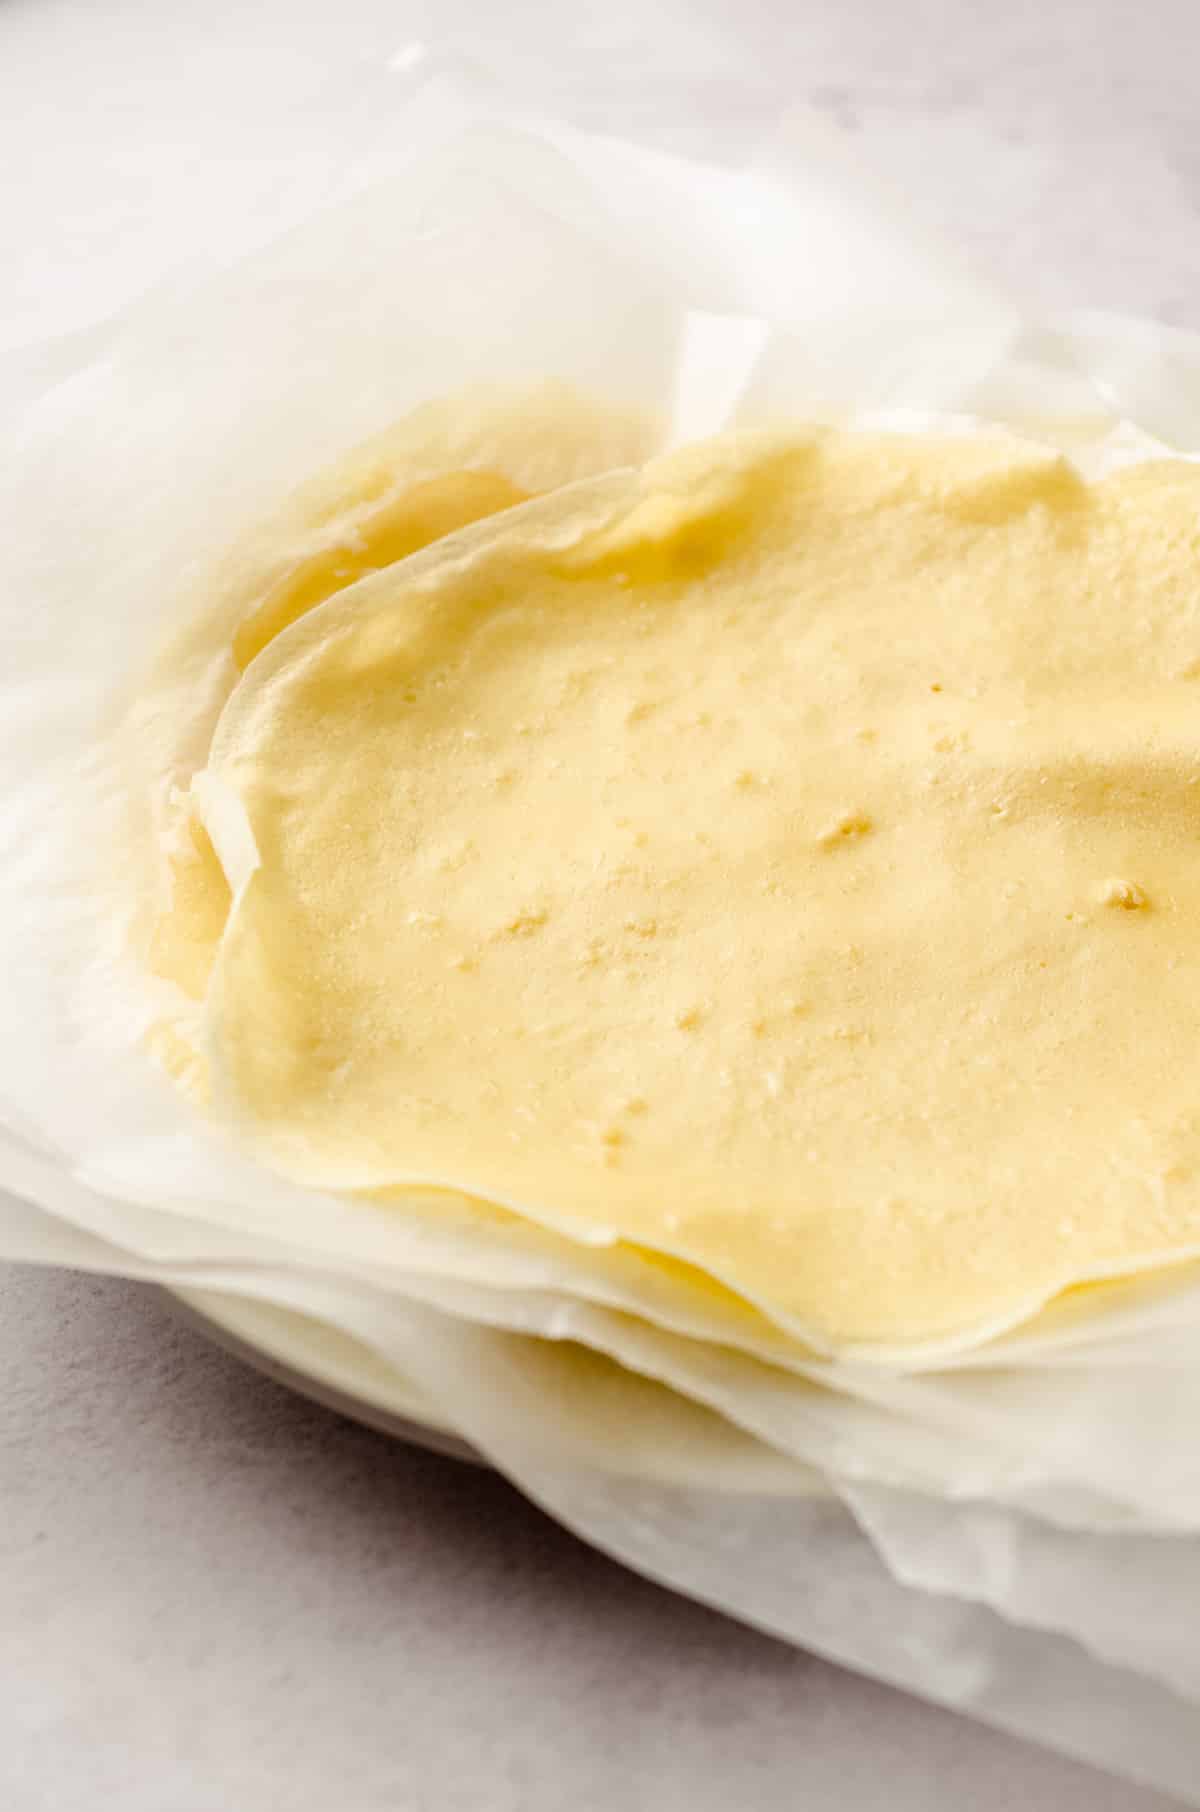 Crepes stacked on a plate between layers of parchment paper.